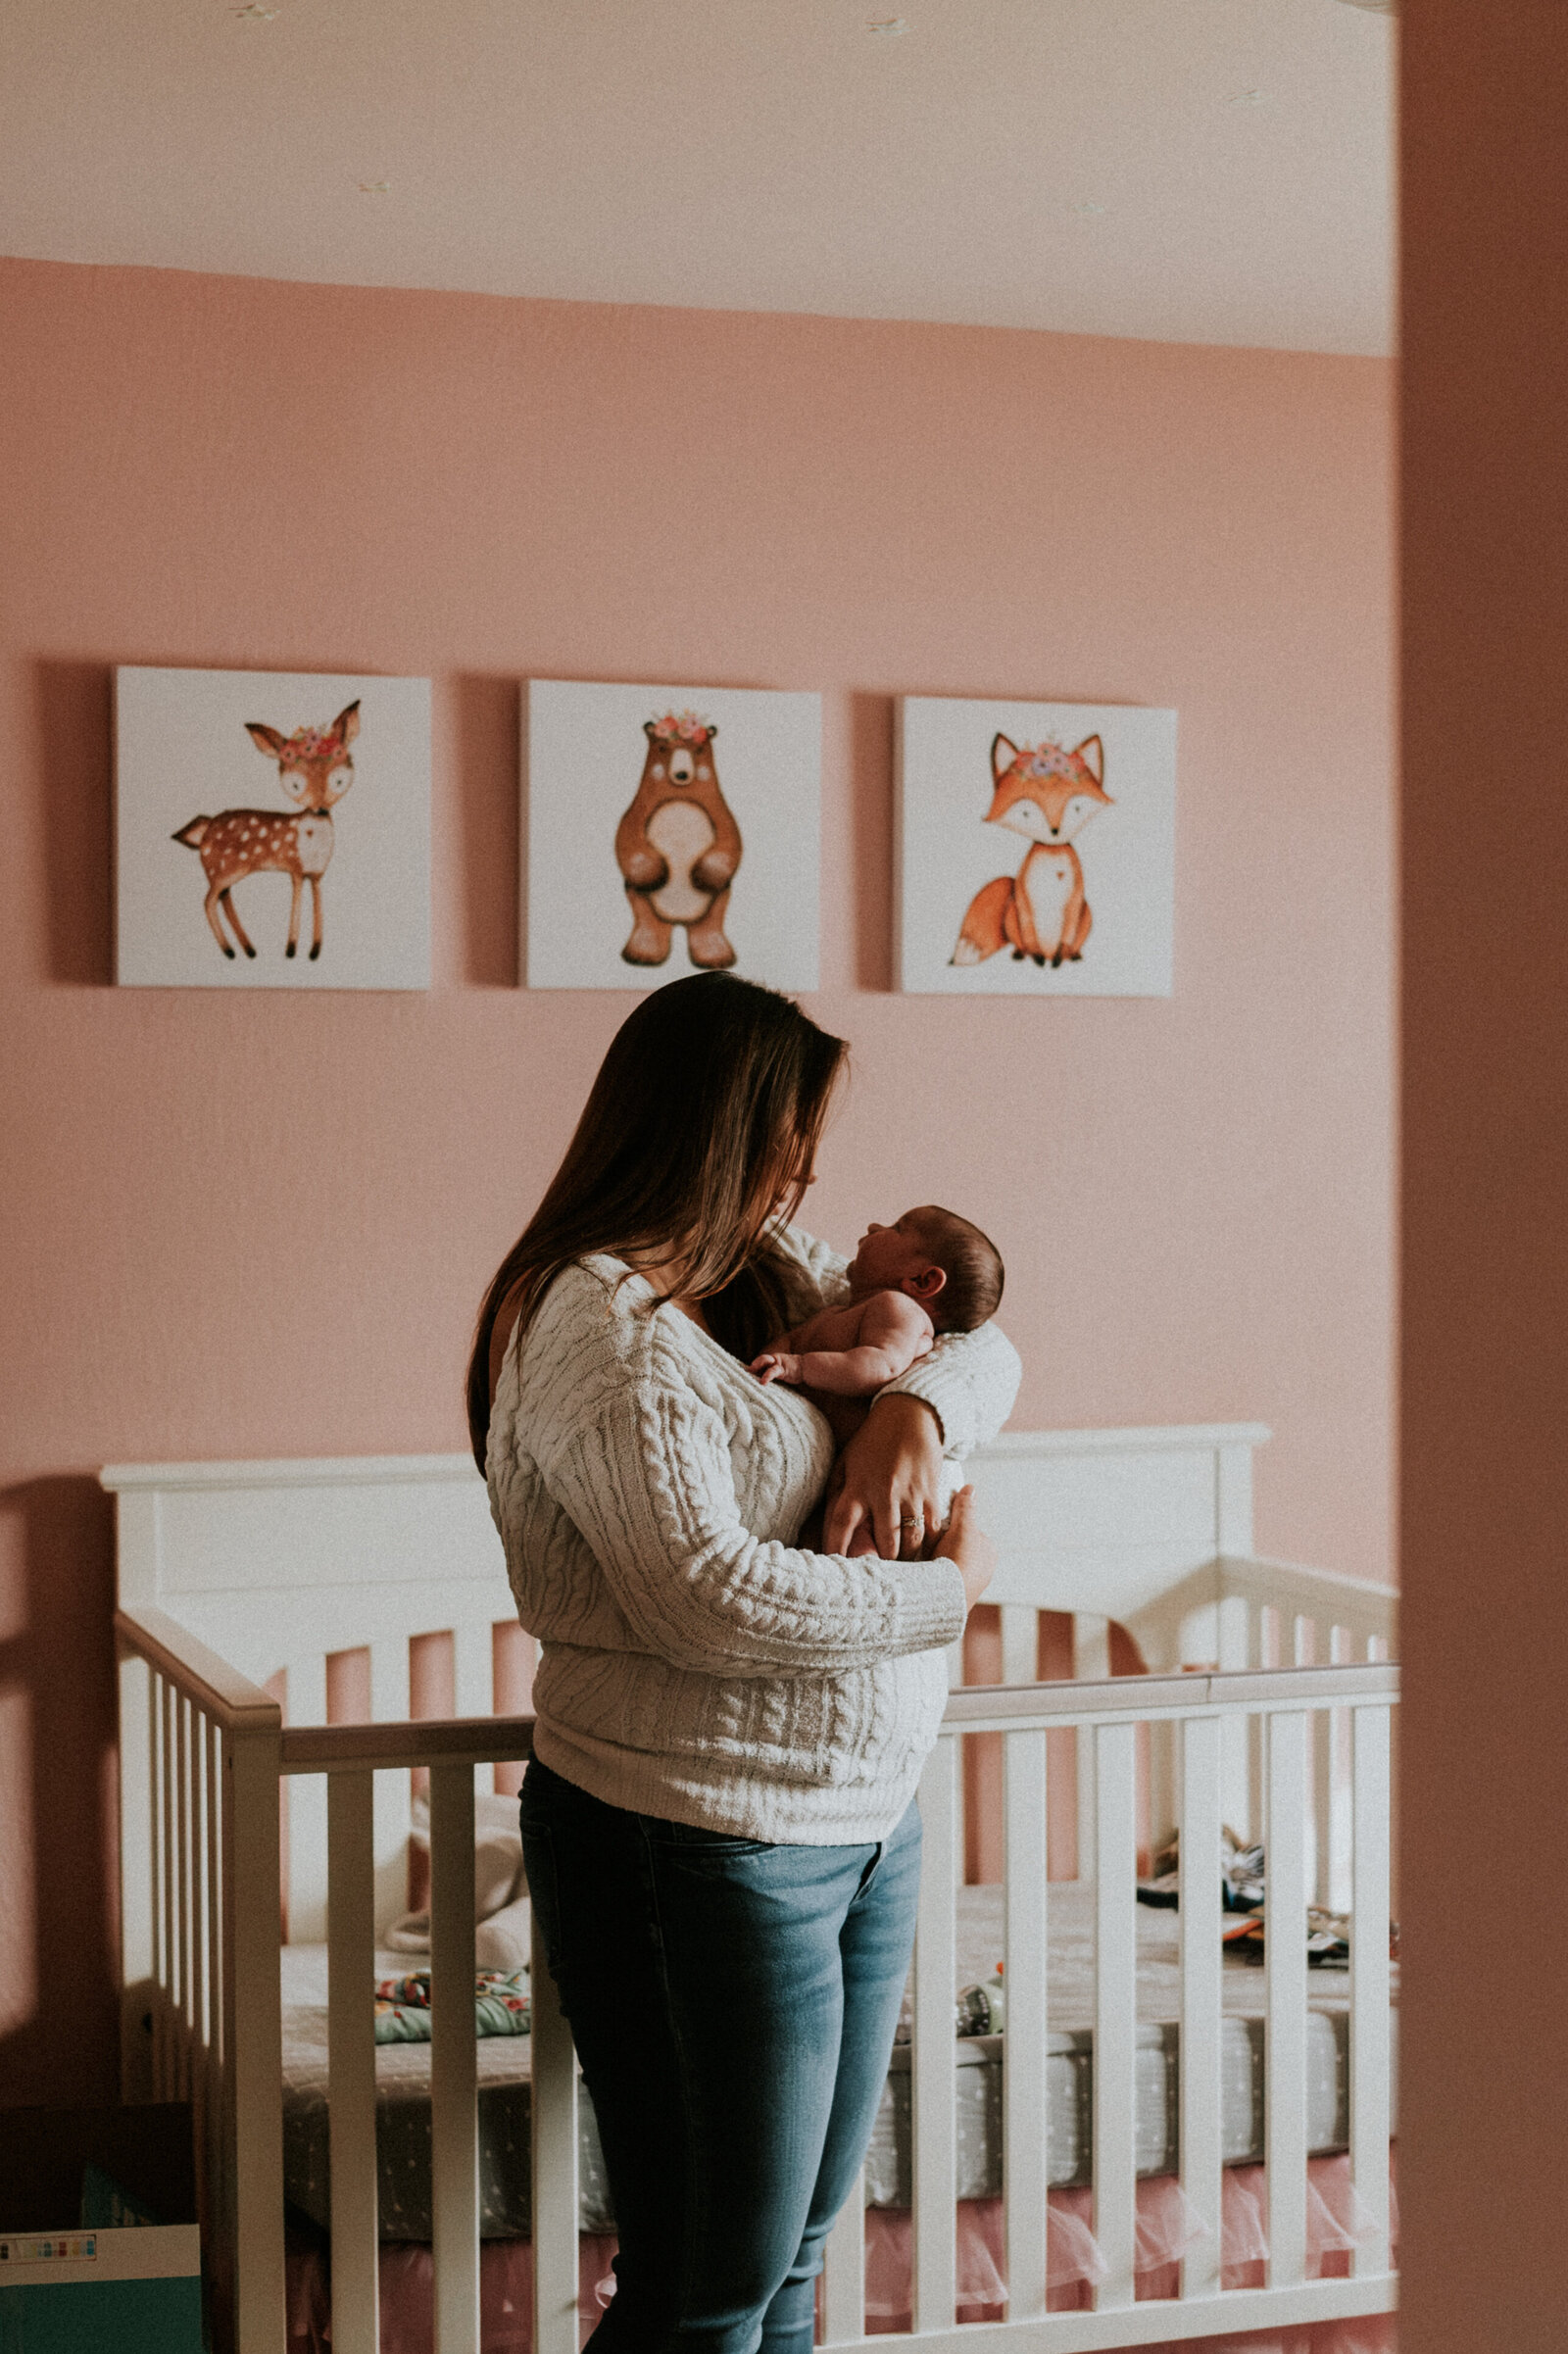 Discover radiant joy in the Twin Cities. Shannon Kathleen Photography captures the glow of early days with at-home baby photography in St. Paul or Minneapolis. Schedule your session now